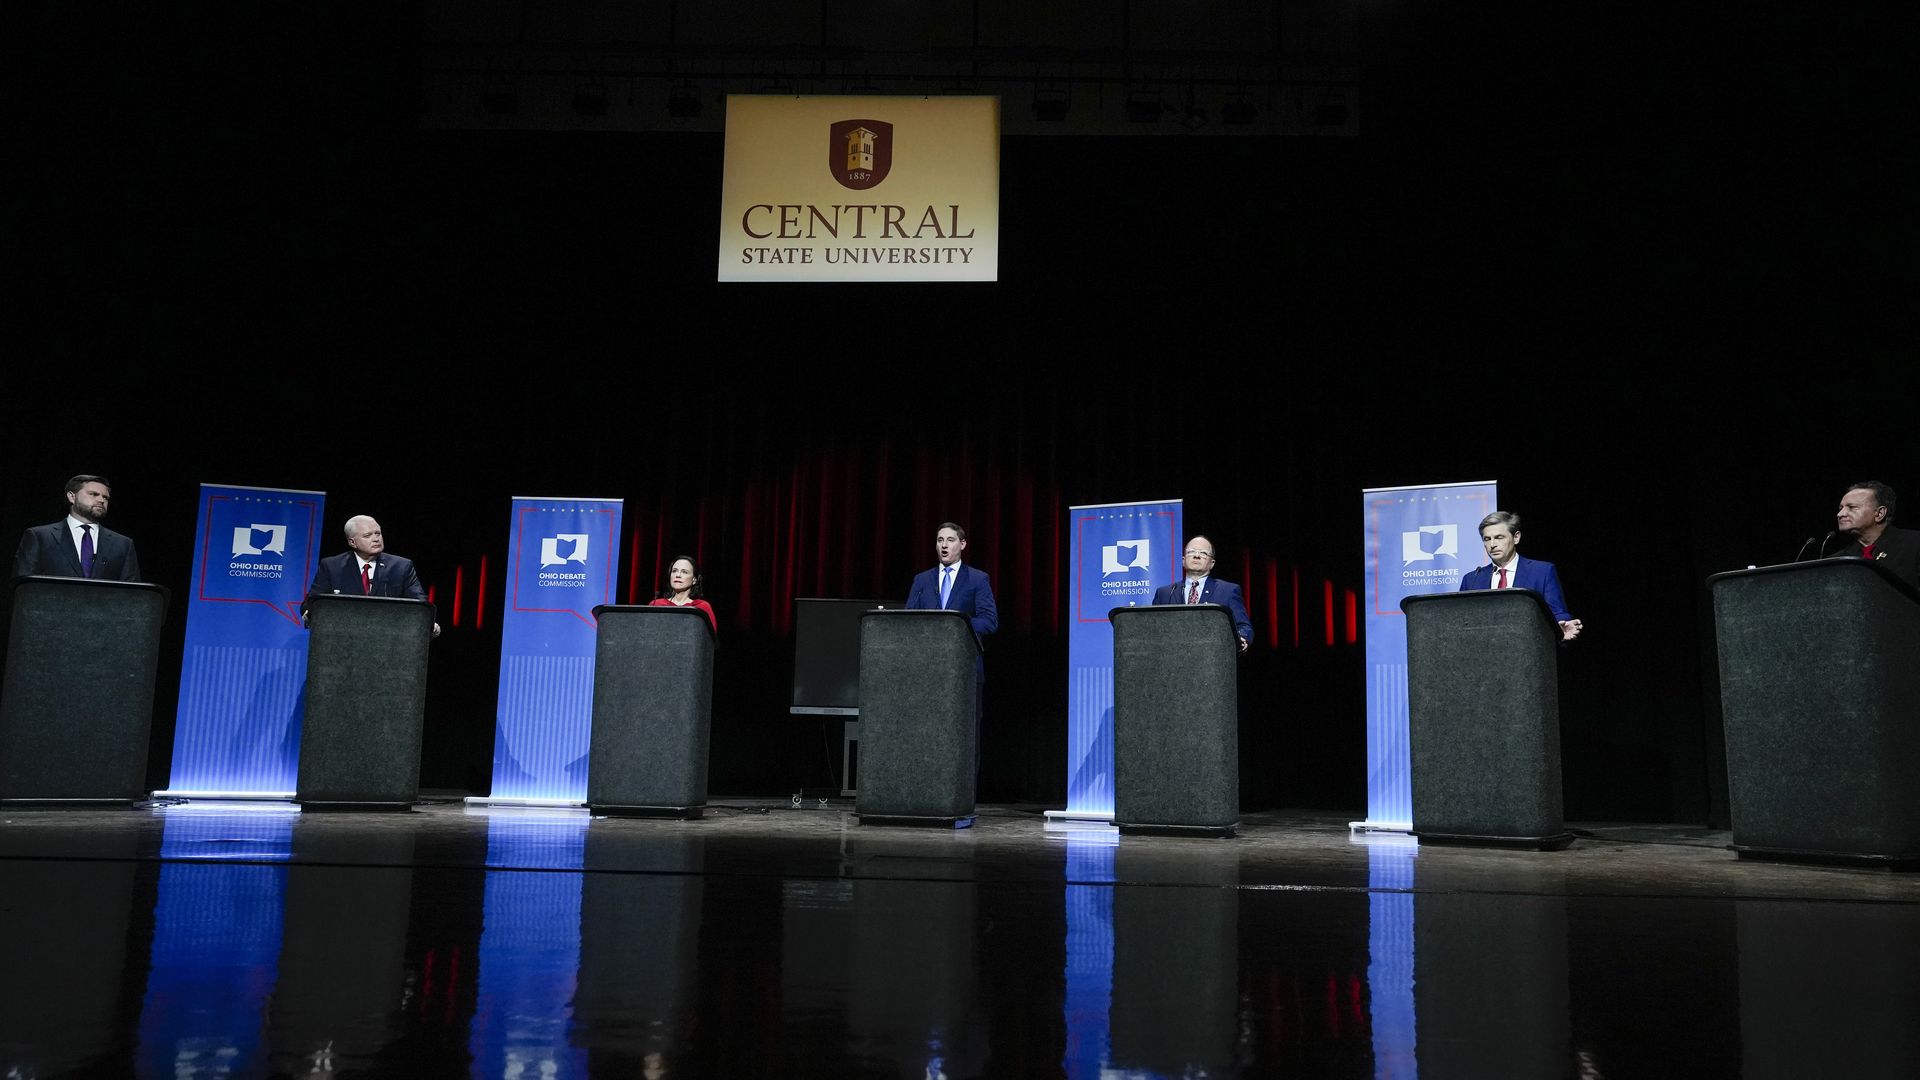 The candidates stand on stage during closing remarks of Ohio's U.S. Senate Republican Primary debate, Monday, March 28, 2022, at Central State University in Wilberforce, Ohio.